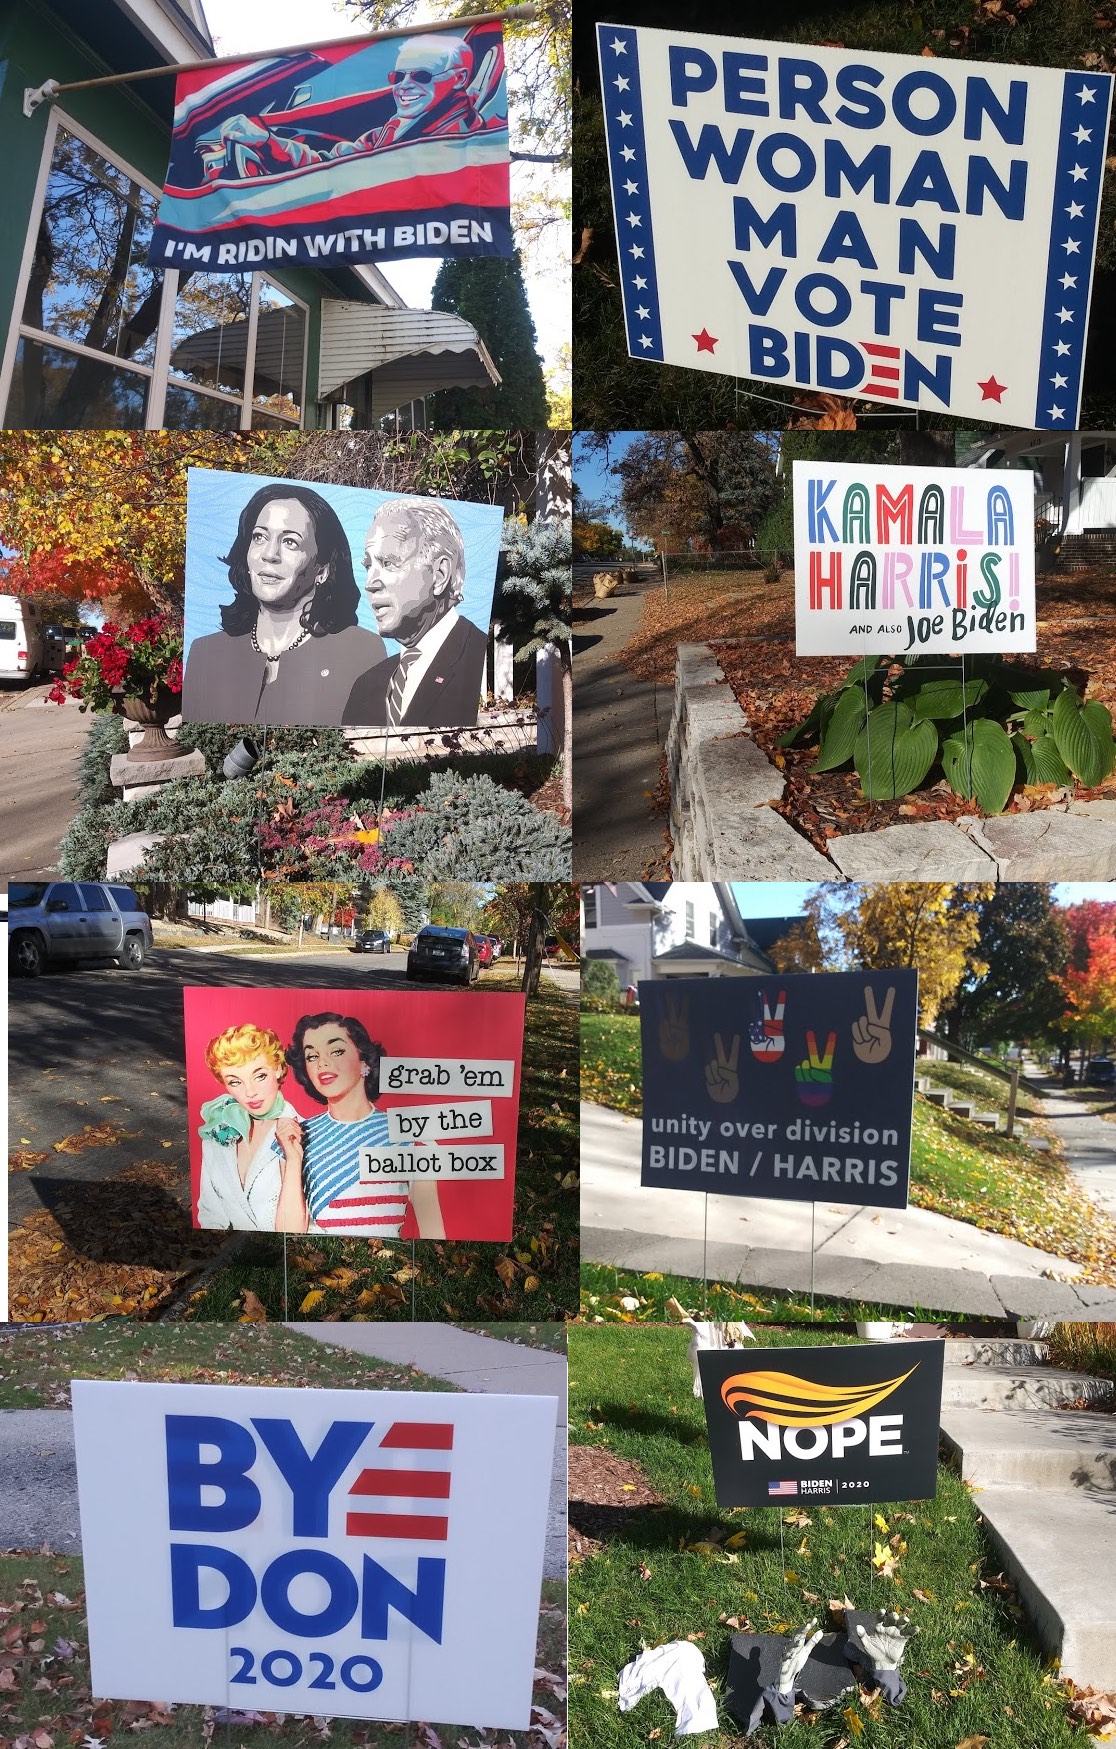 A collection of pro-Biden signs,
including a hand-painted portrait of Biden/Harris, one that says 'I'm ridin' with Biden,' and one that says 'grab 'em by the 
ballot box'